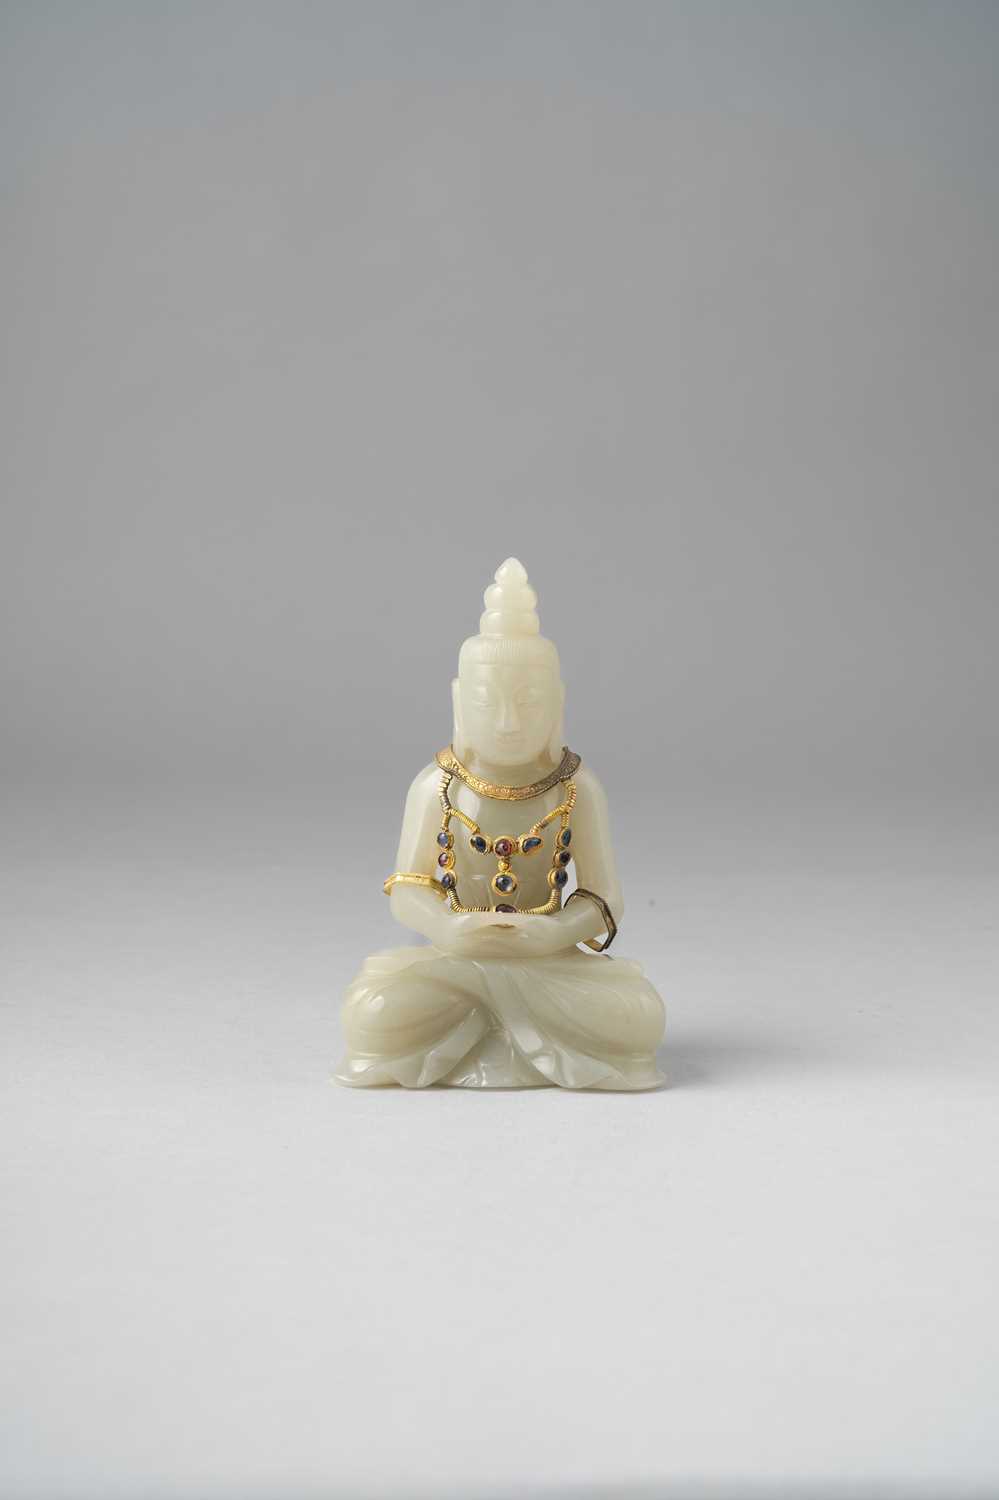 A CHINESE PALE CELADON JADE FIGURE OF BUDDHA 19TH CENTURY Seated in dhyanasana, his hands resting on